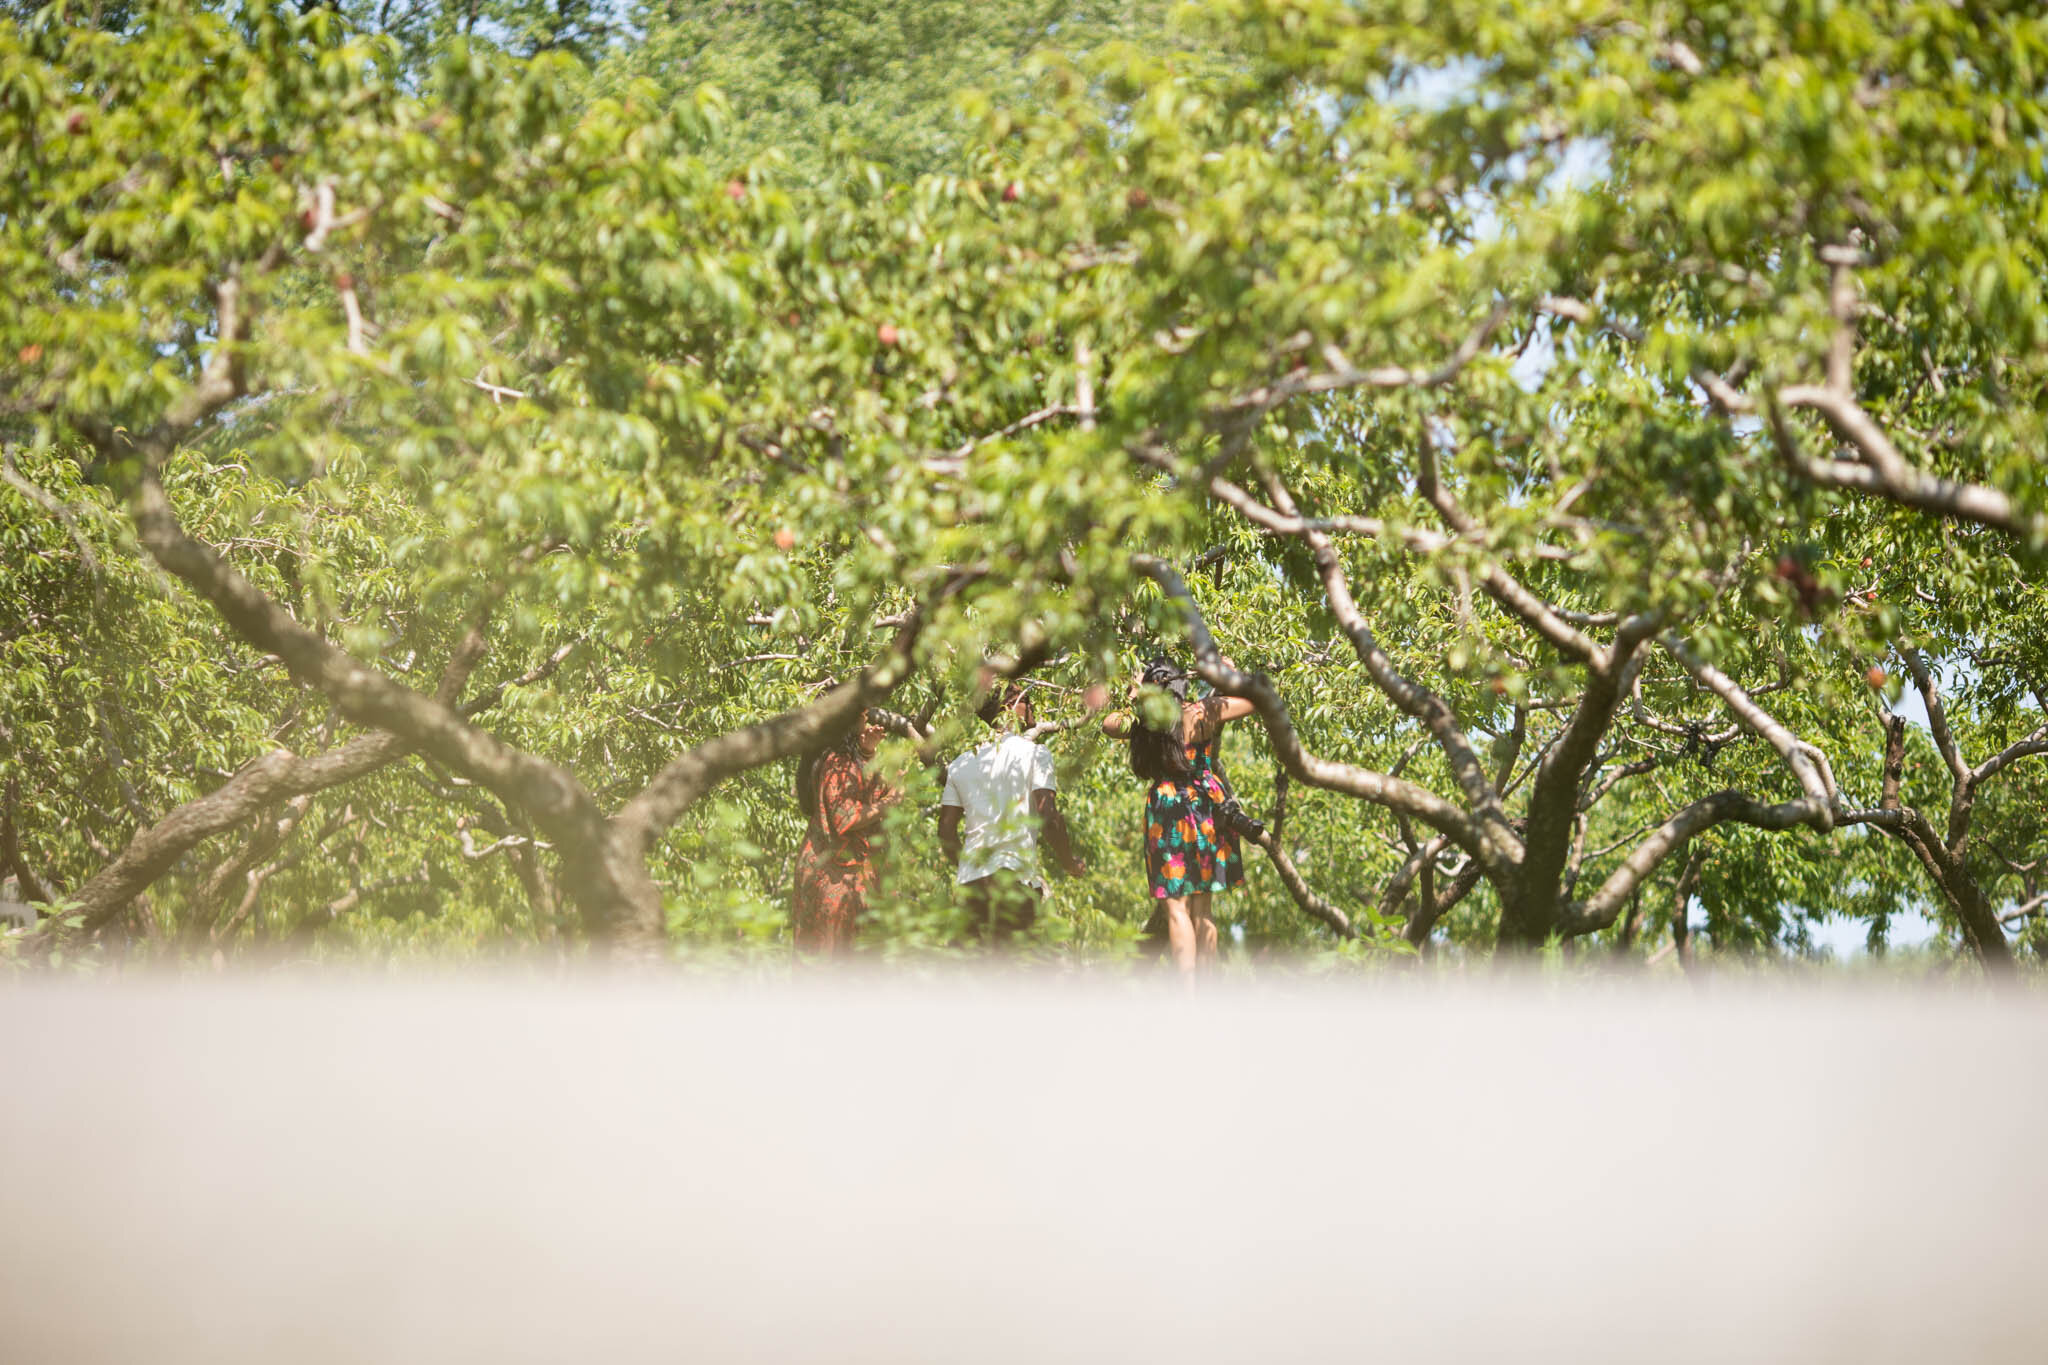 friends picking peaches at Cherry Avenue Farms with blurred road in the foreground.jpg